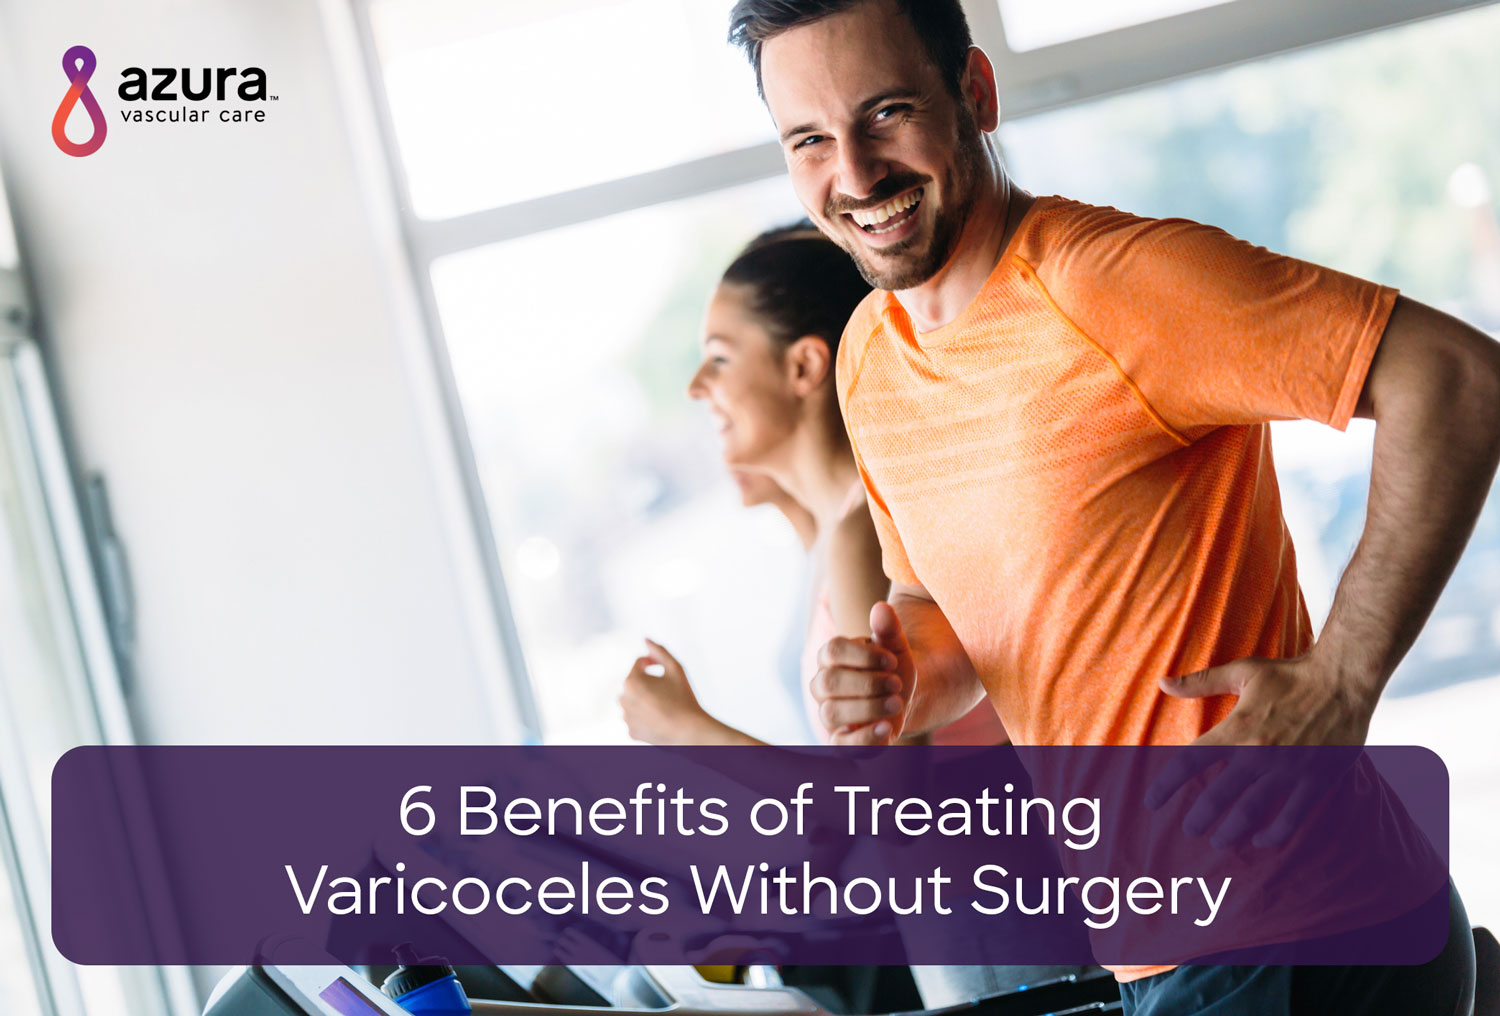 https://www.azuravascularcare.com//assets/treating-varicocele-without-surgery.jpg